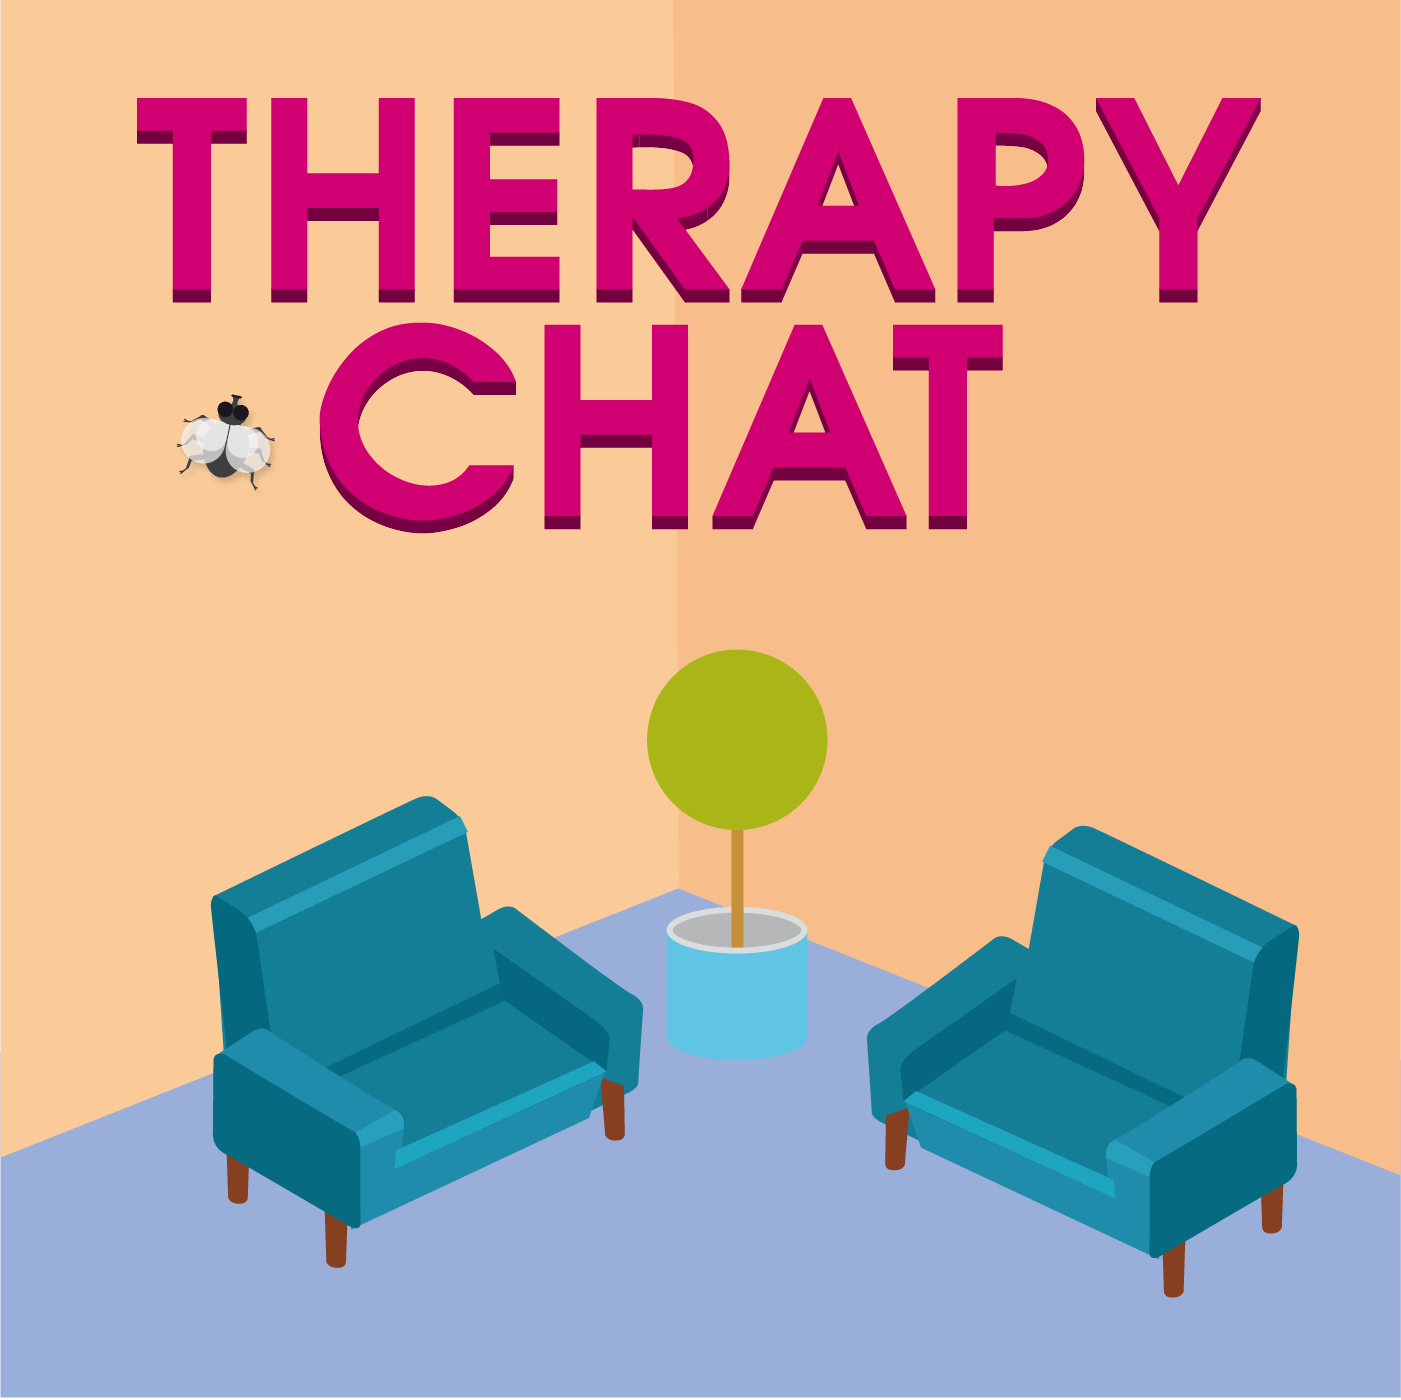 252: Teletherapy With Kids with Dr. Roseann Cappana-hodge